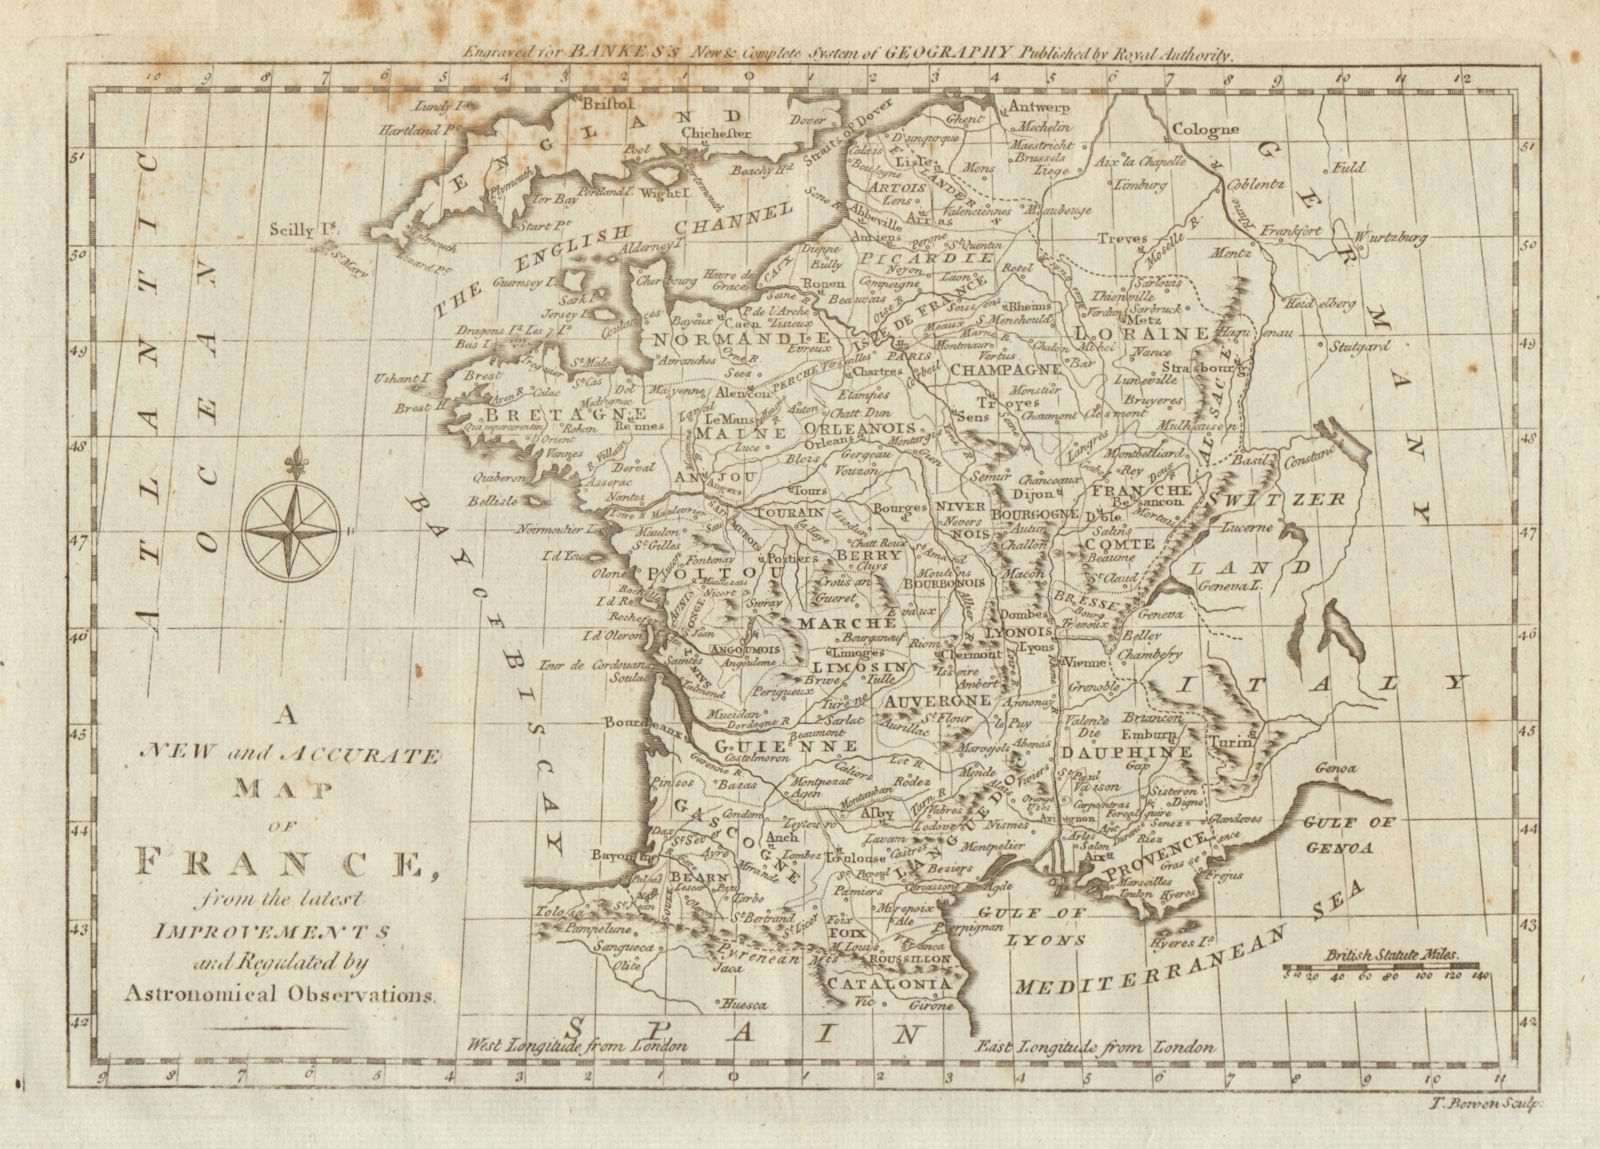 A new and accurate map of France, from the latest improvements. BOWEN 1789